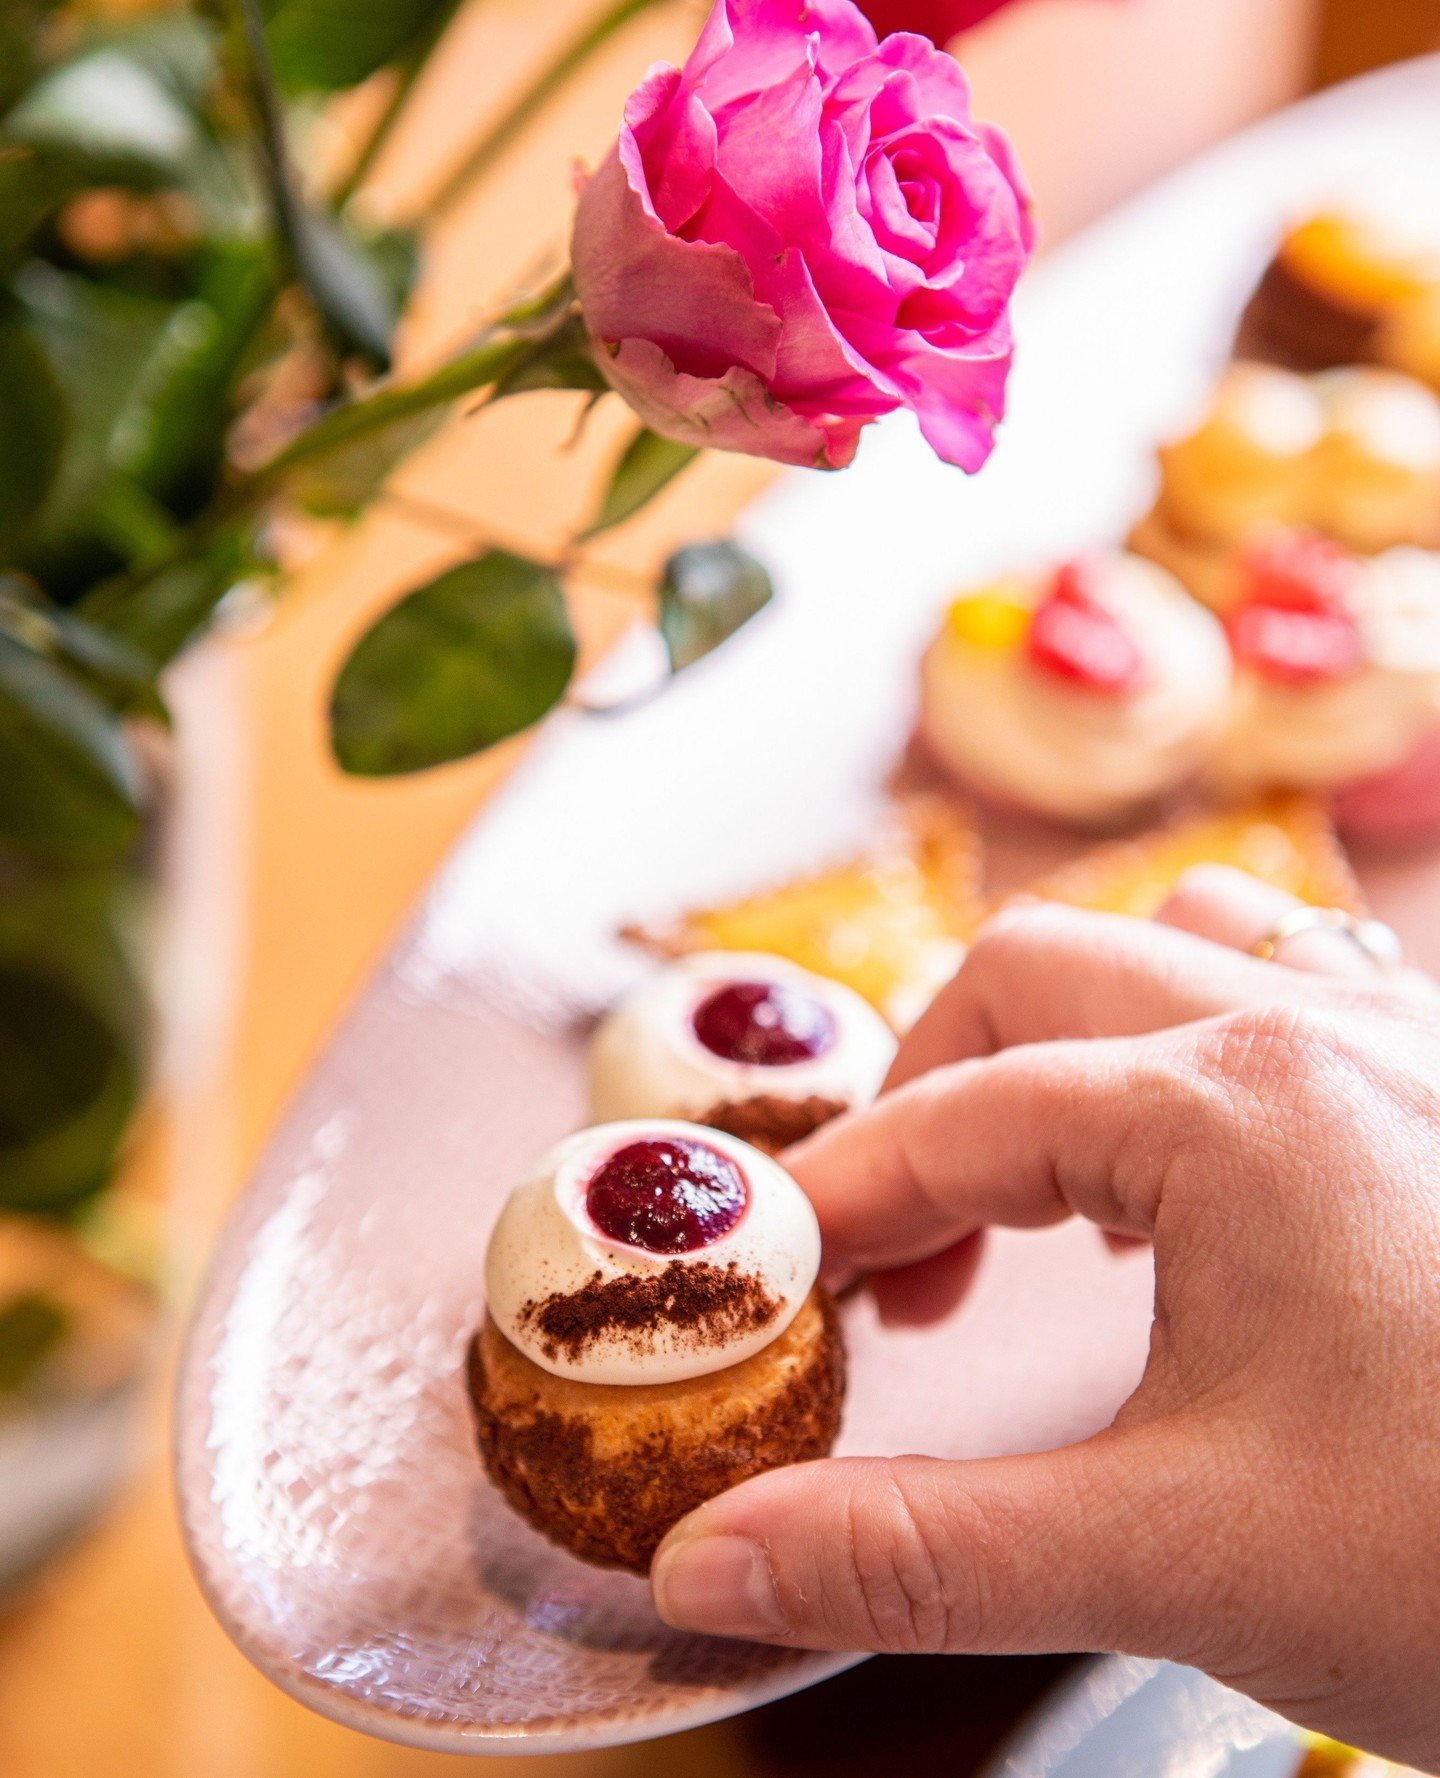 Mother's Day treats are online!⁠
Get on the link in bio to order⁠
⁠
Make your Mother's Day extra special with our High Tea. Order online and pick up at King Street Bakery on May 11th.⁠
⁠
High Tea Includes⁠
Sweets &amp; Pastry items:⁠
2 x Raspberry &a